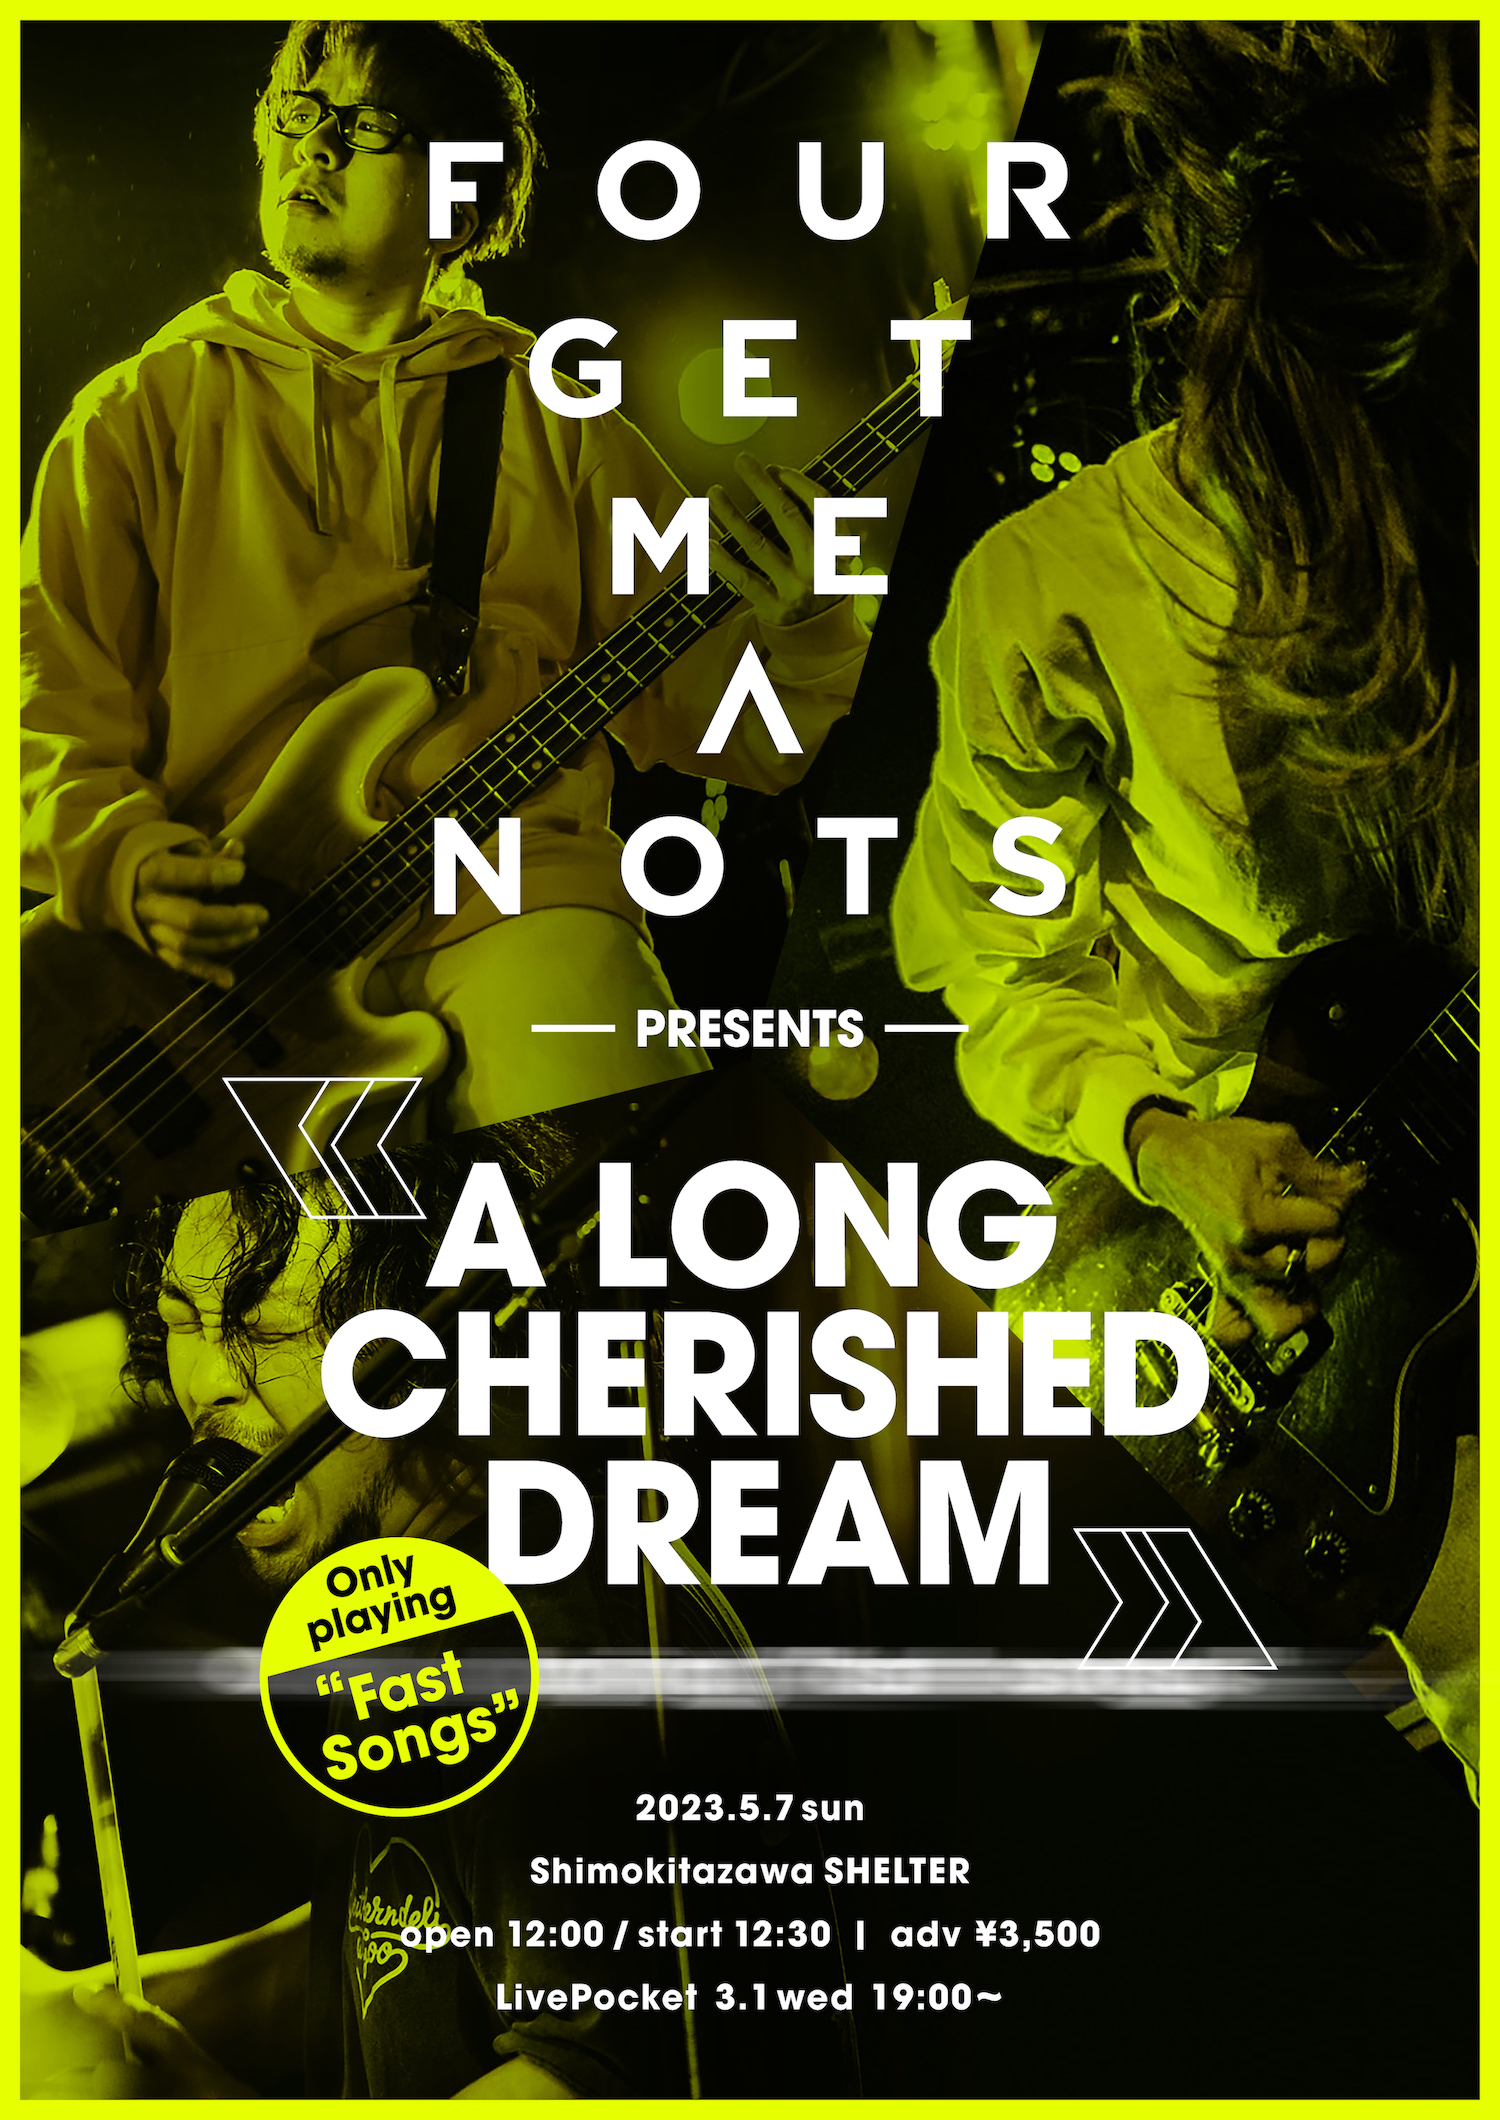 FOUR GET ME A NOTS presents "A LONG CHERISHED DREAM" Only playing "fast songs"